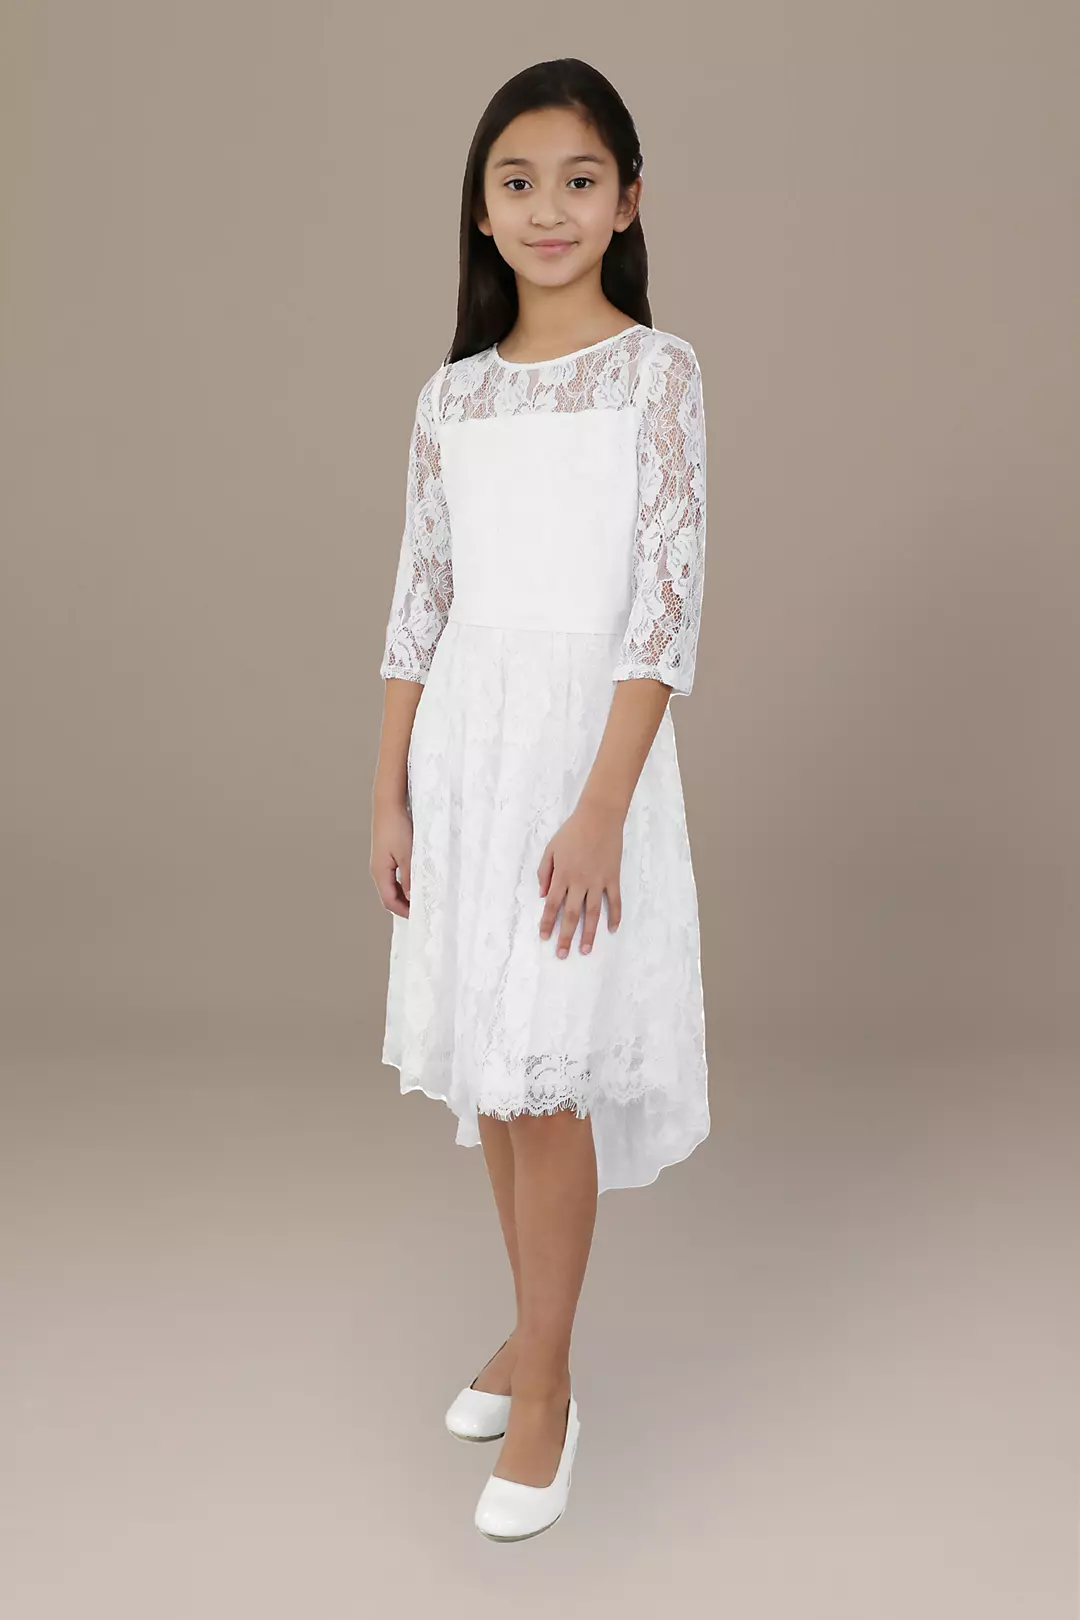 Erica High-Low Lace Flower Girl Dress Image